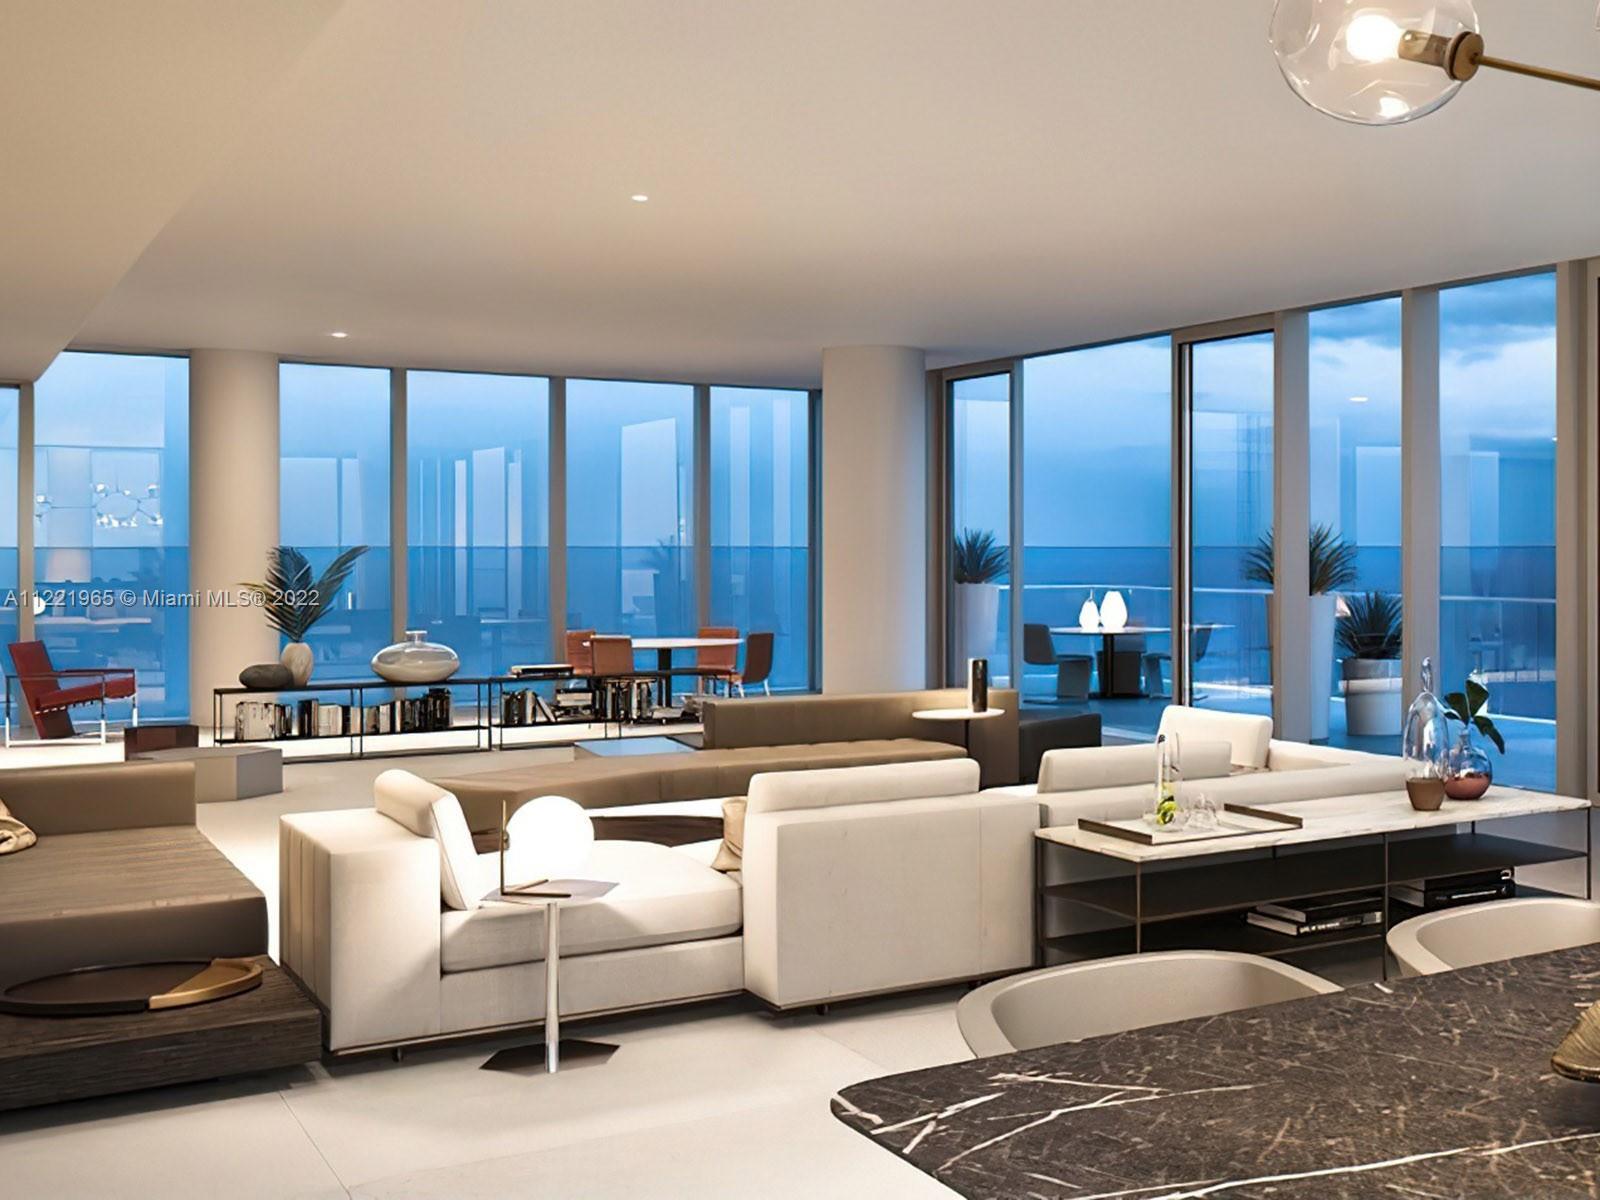 New contemporary 38 story sleek glass tower with only 63 residences and EXPANSIVE OCEAN VIEWS, desig